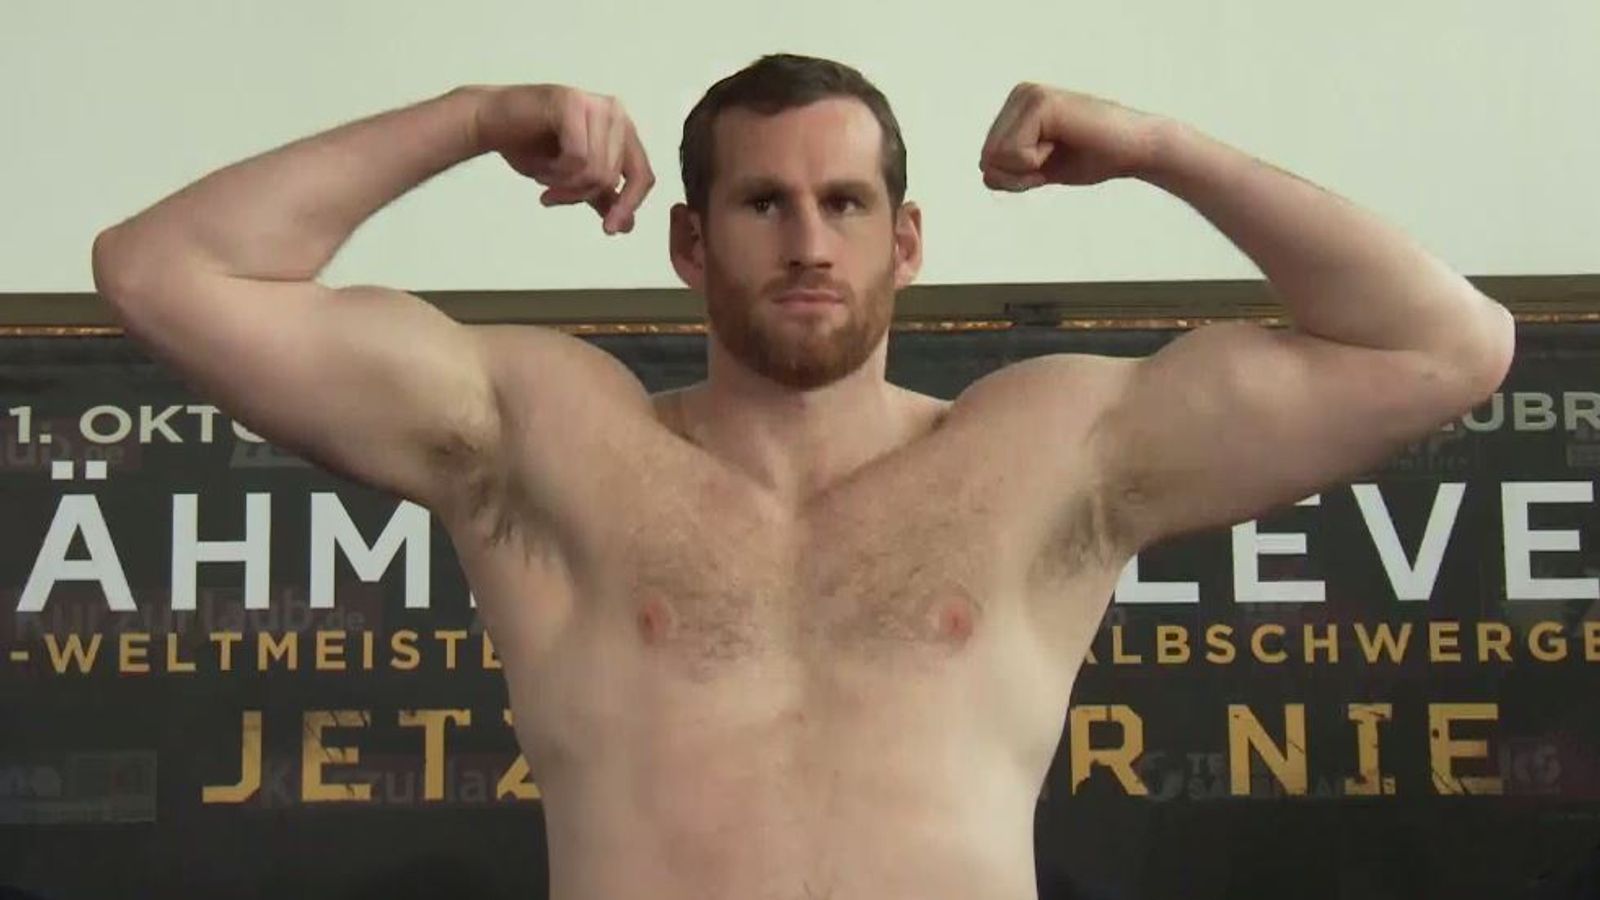 David Price to fight Christian Hammer on February 4 in London | Boxing News | Sky Sports